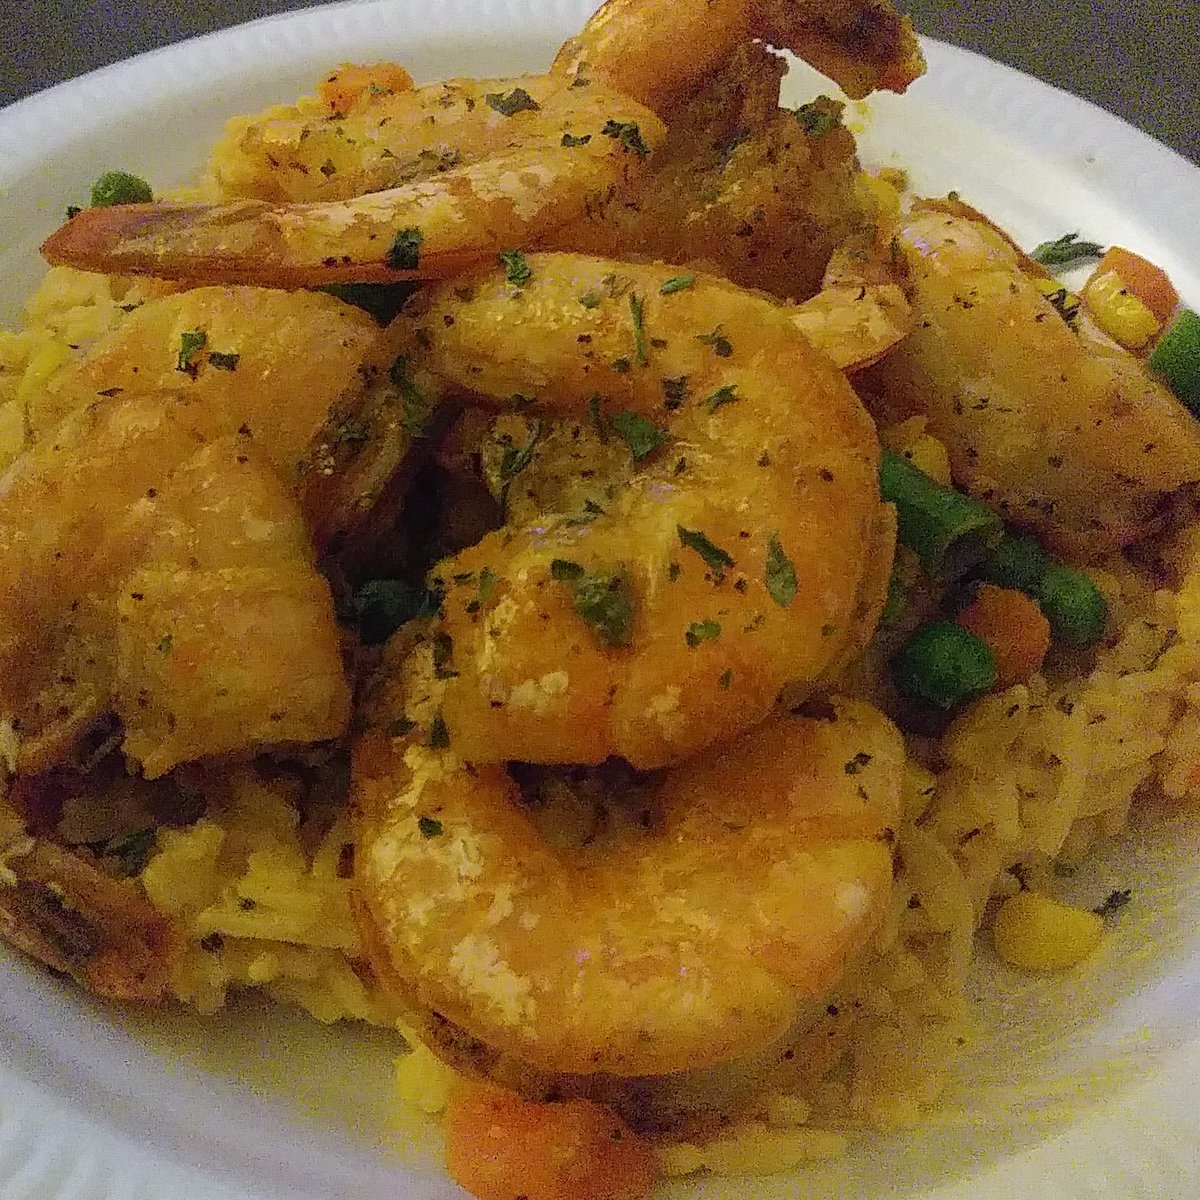 Garlic shrimp with mixed vegetables and creamy rice
#cheflife #phillycooks #homechefs